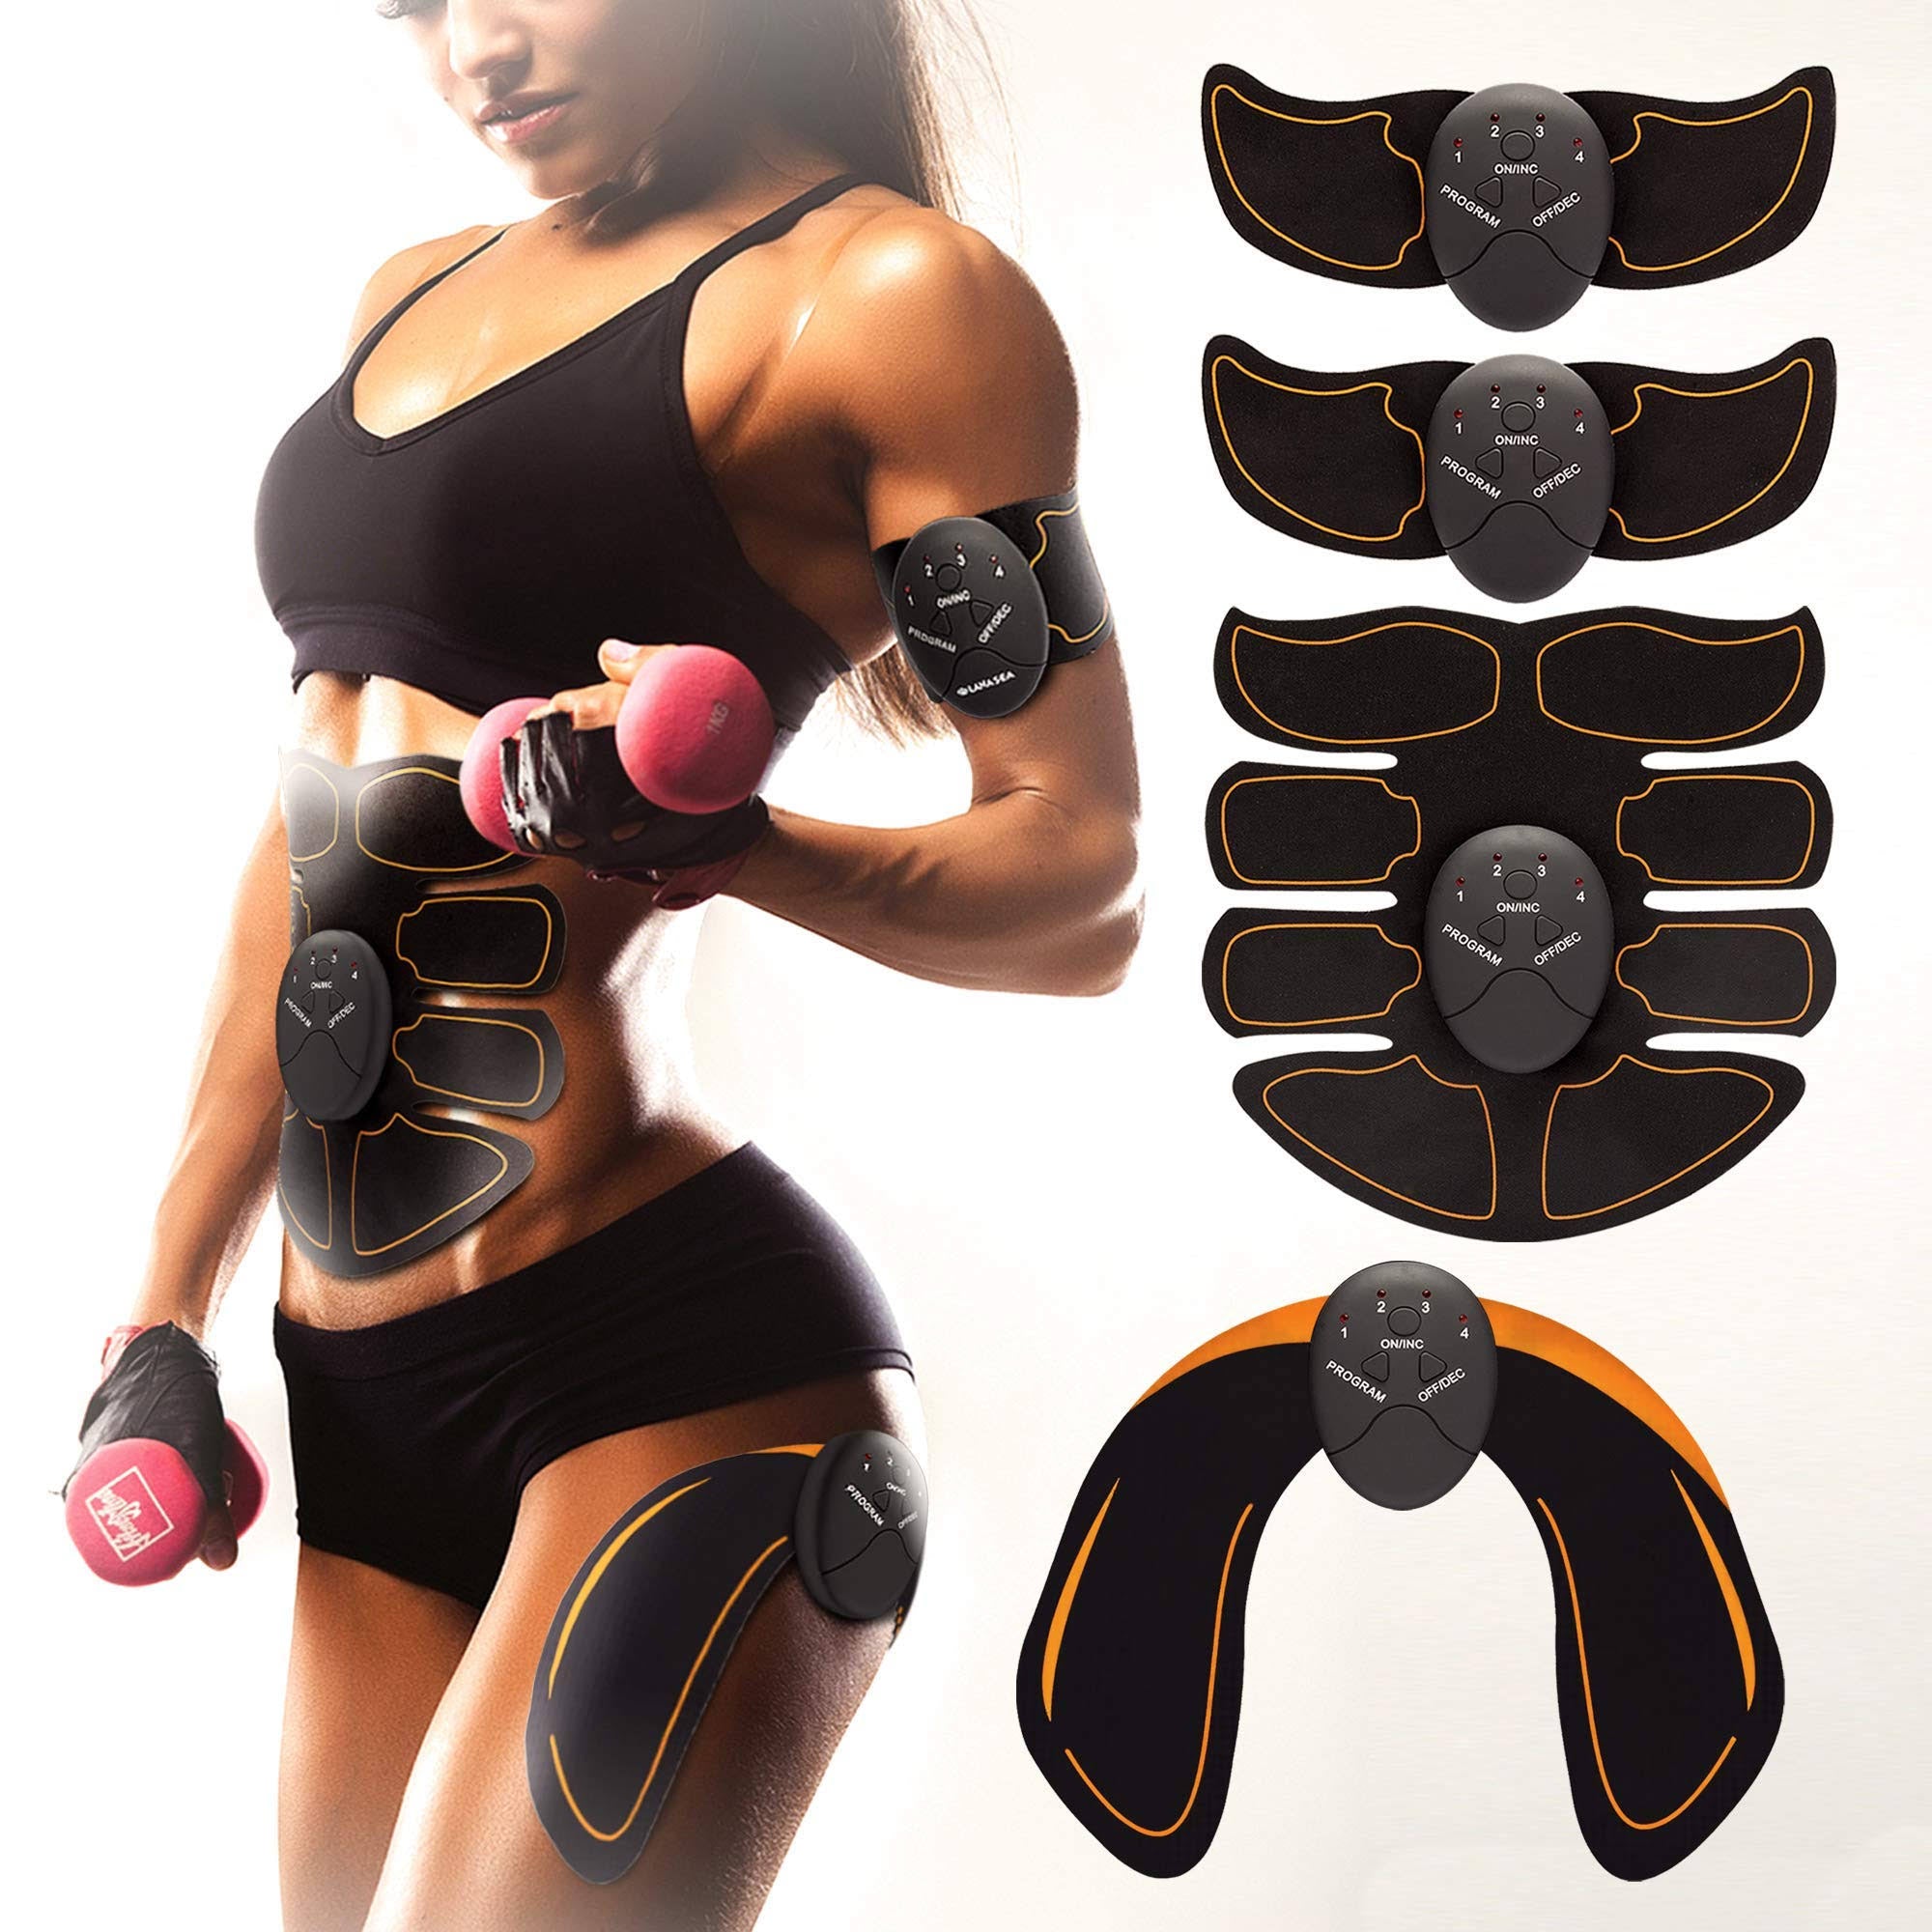 EMS Abdominal Fitness Trainer